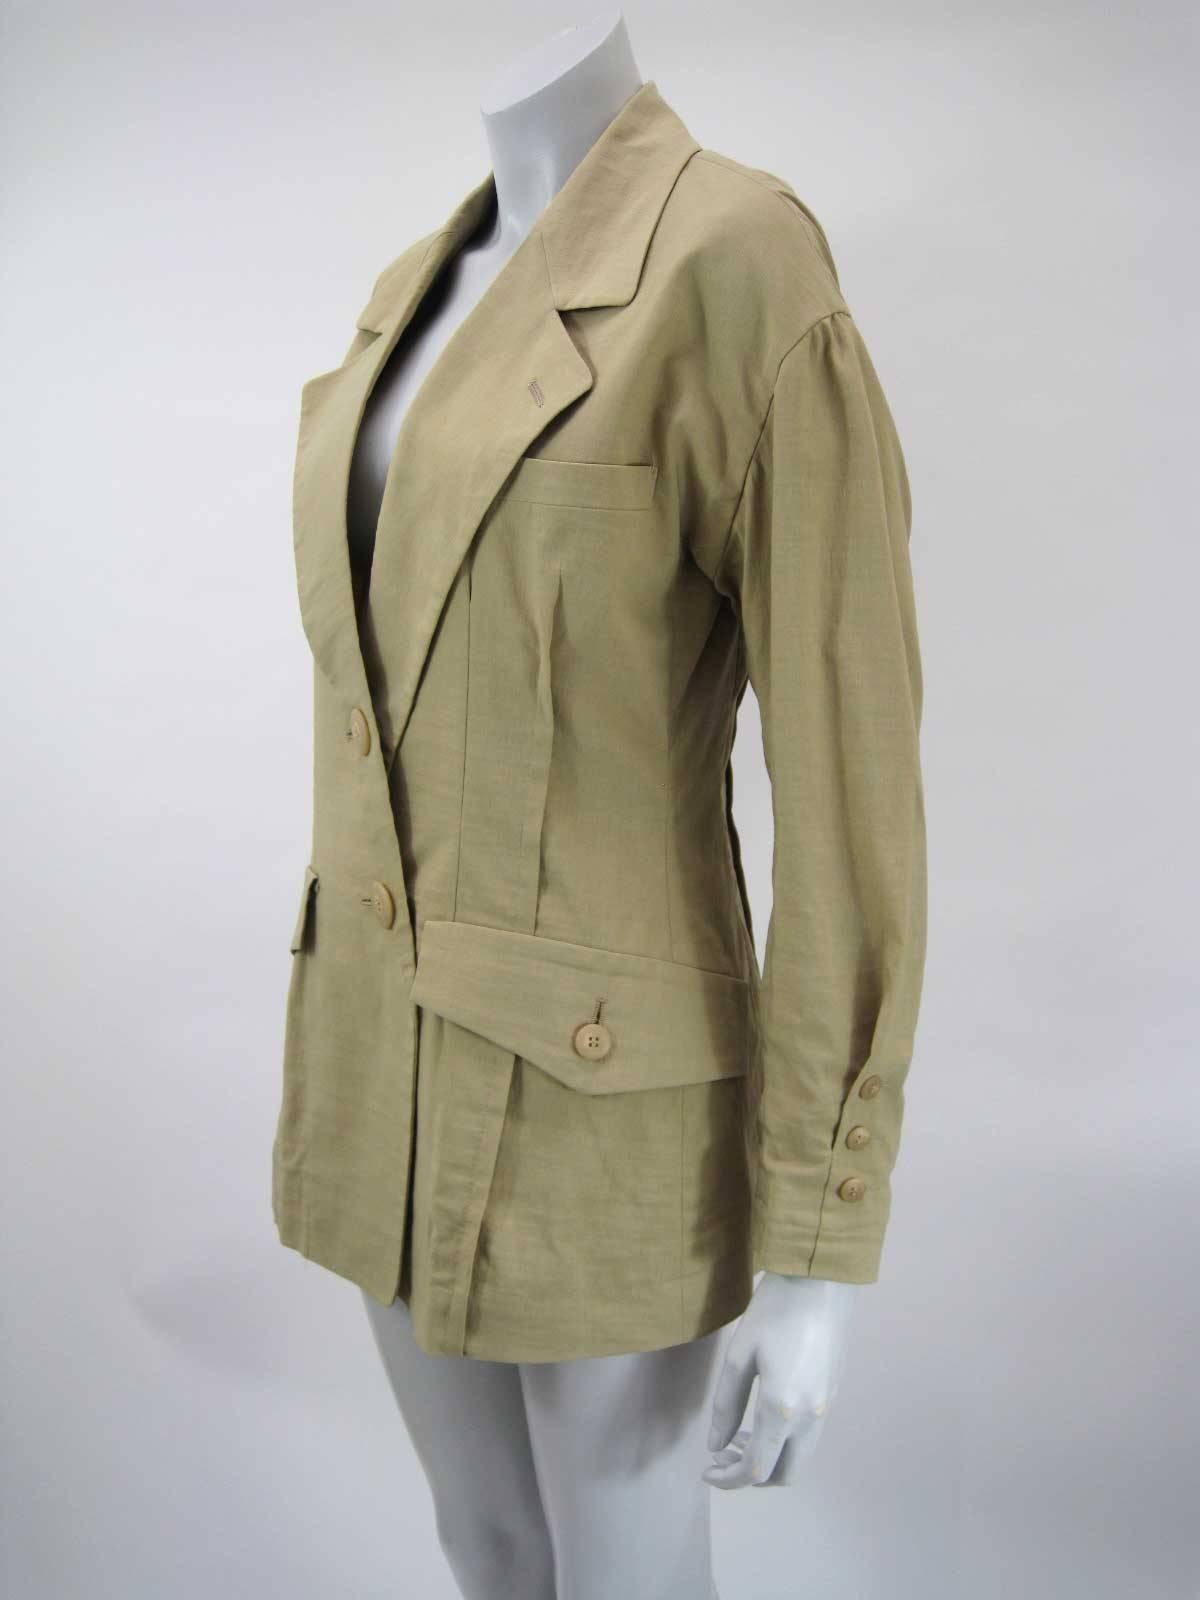 Vintage Issey Miyake menswear inspired blazer.

Tan khaki color.

Exaggerated shoulders with slightly puffed sleeves.

Long fitted shape. 

Pintuck pleats and slightly asymmetrical button closure.

Double asymmetrical wrap around buttons.

Button